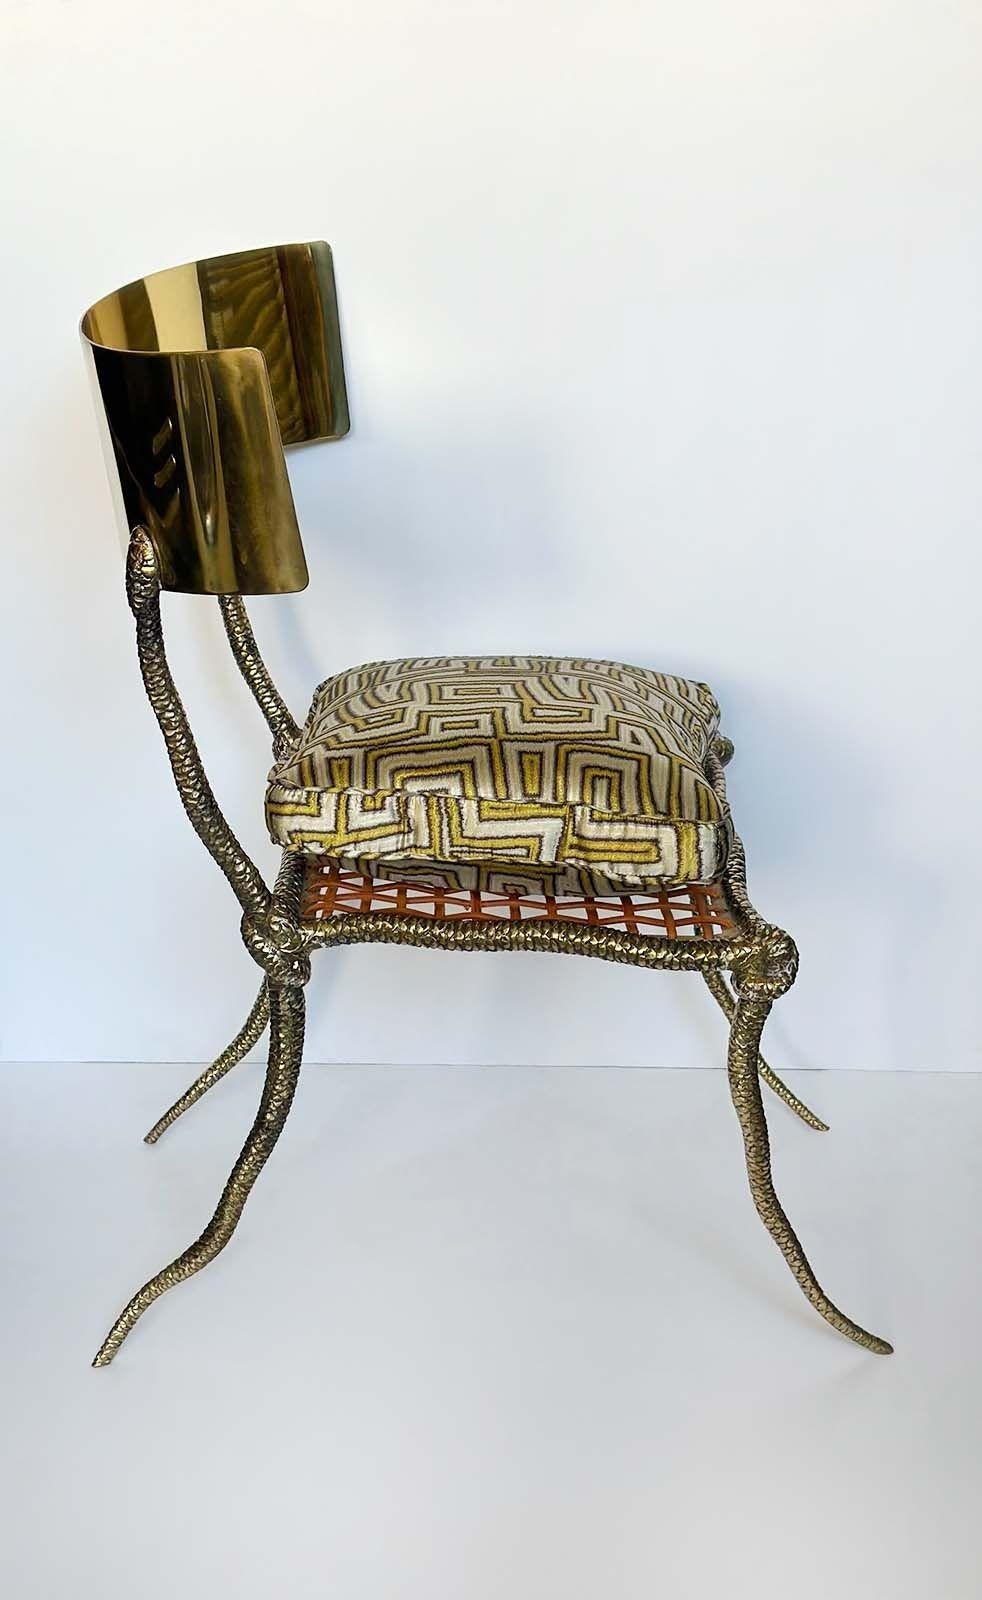 Contemporary Pair of Polished Brass Klismos Chairs with Snake Design For Sale